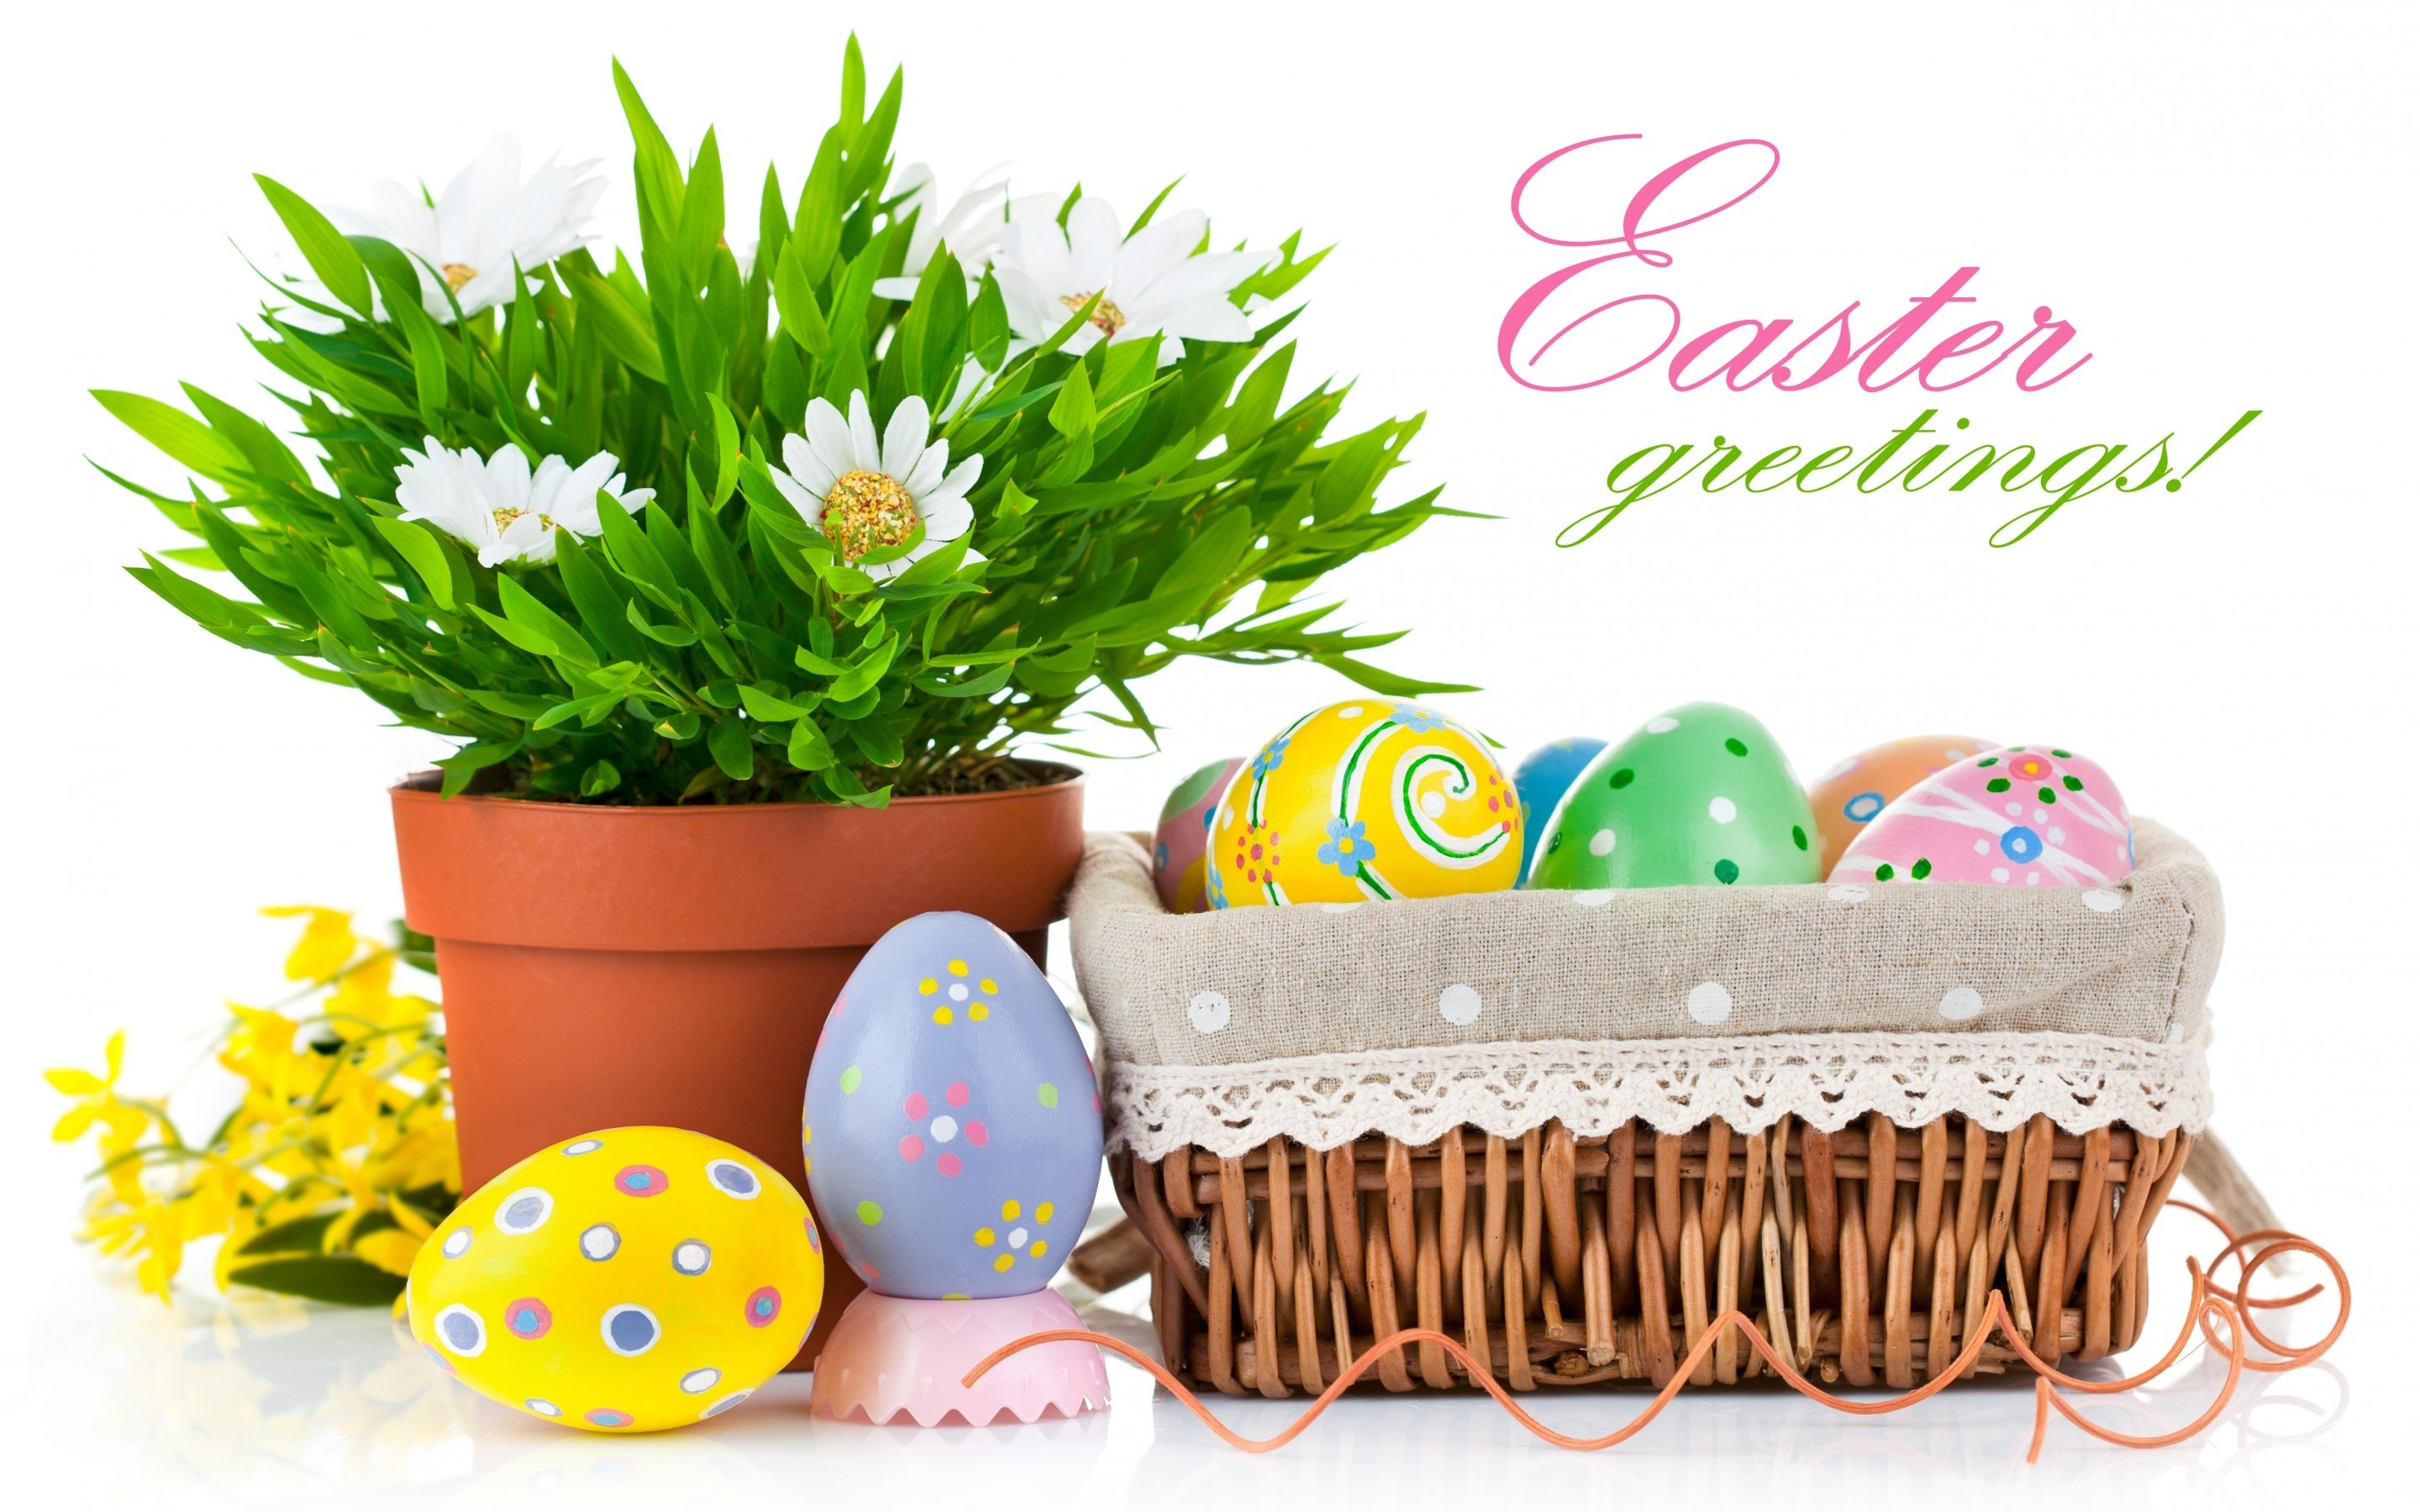 Easter Greetings for 2880 x 1800 Retina Display resolution